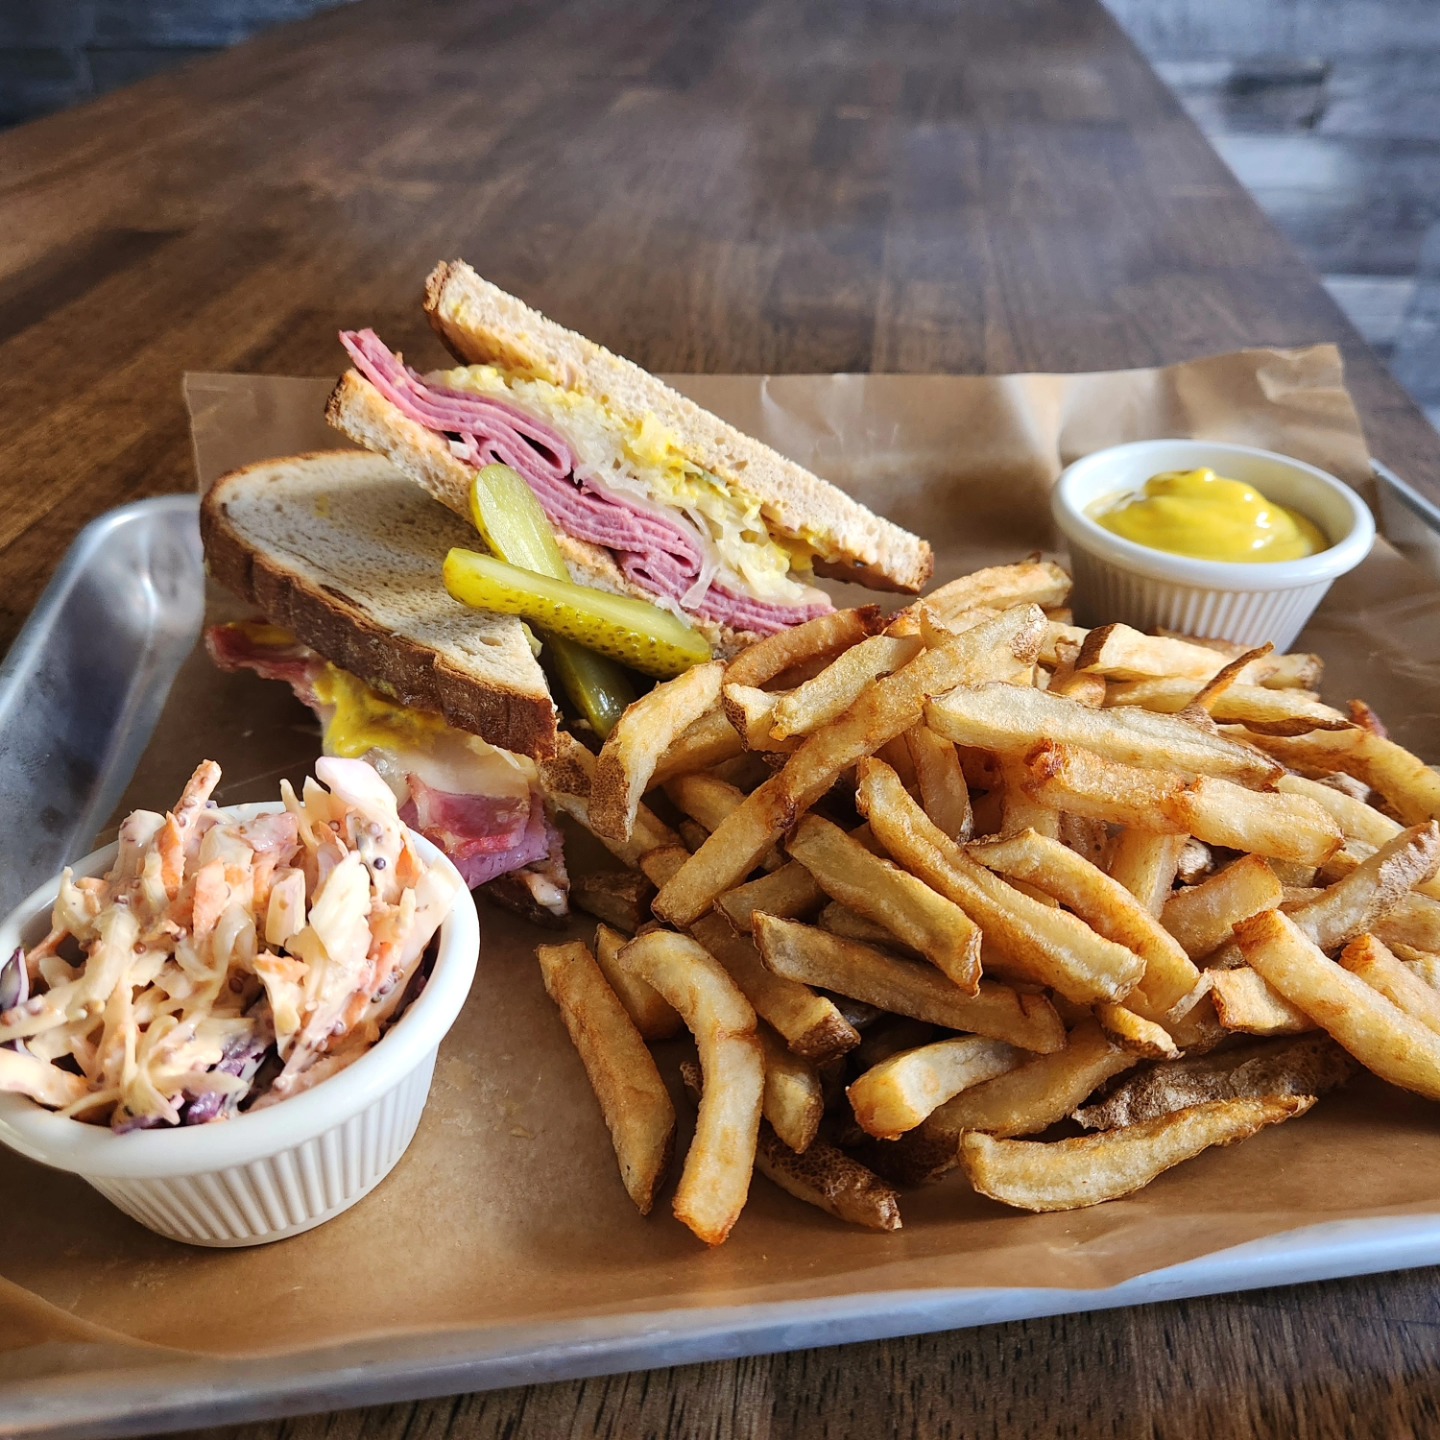 Sandwich and fries on a plate